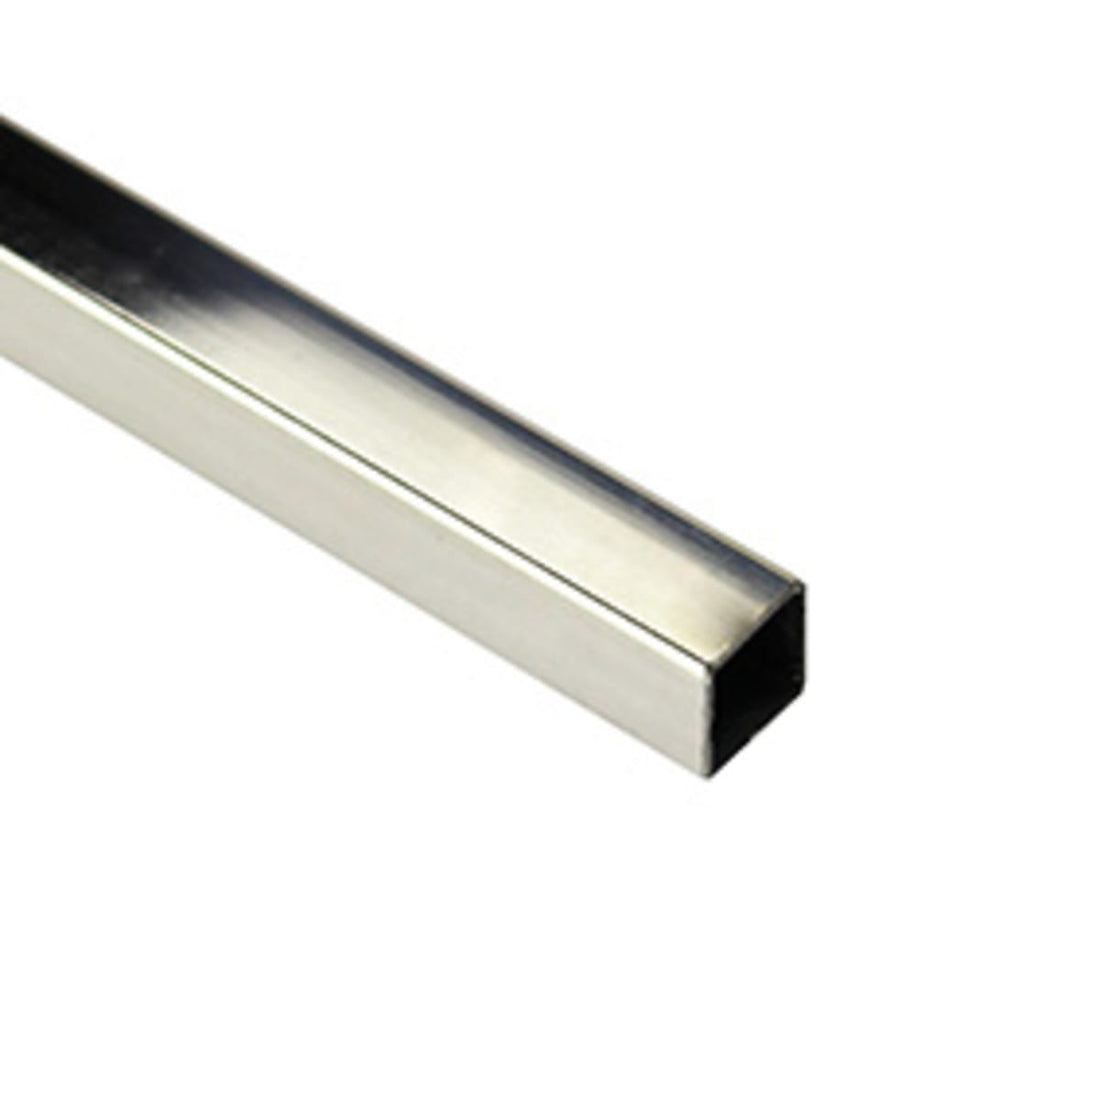 SQUARE TUBE MM1000X15 STAINLESS STEEL